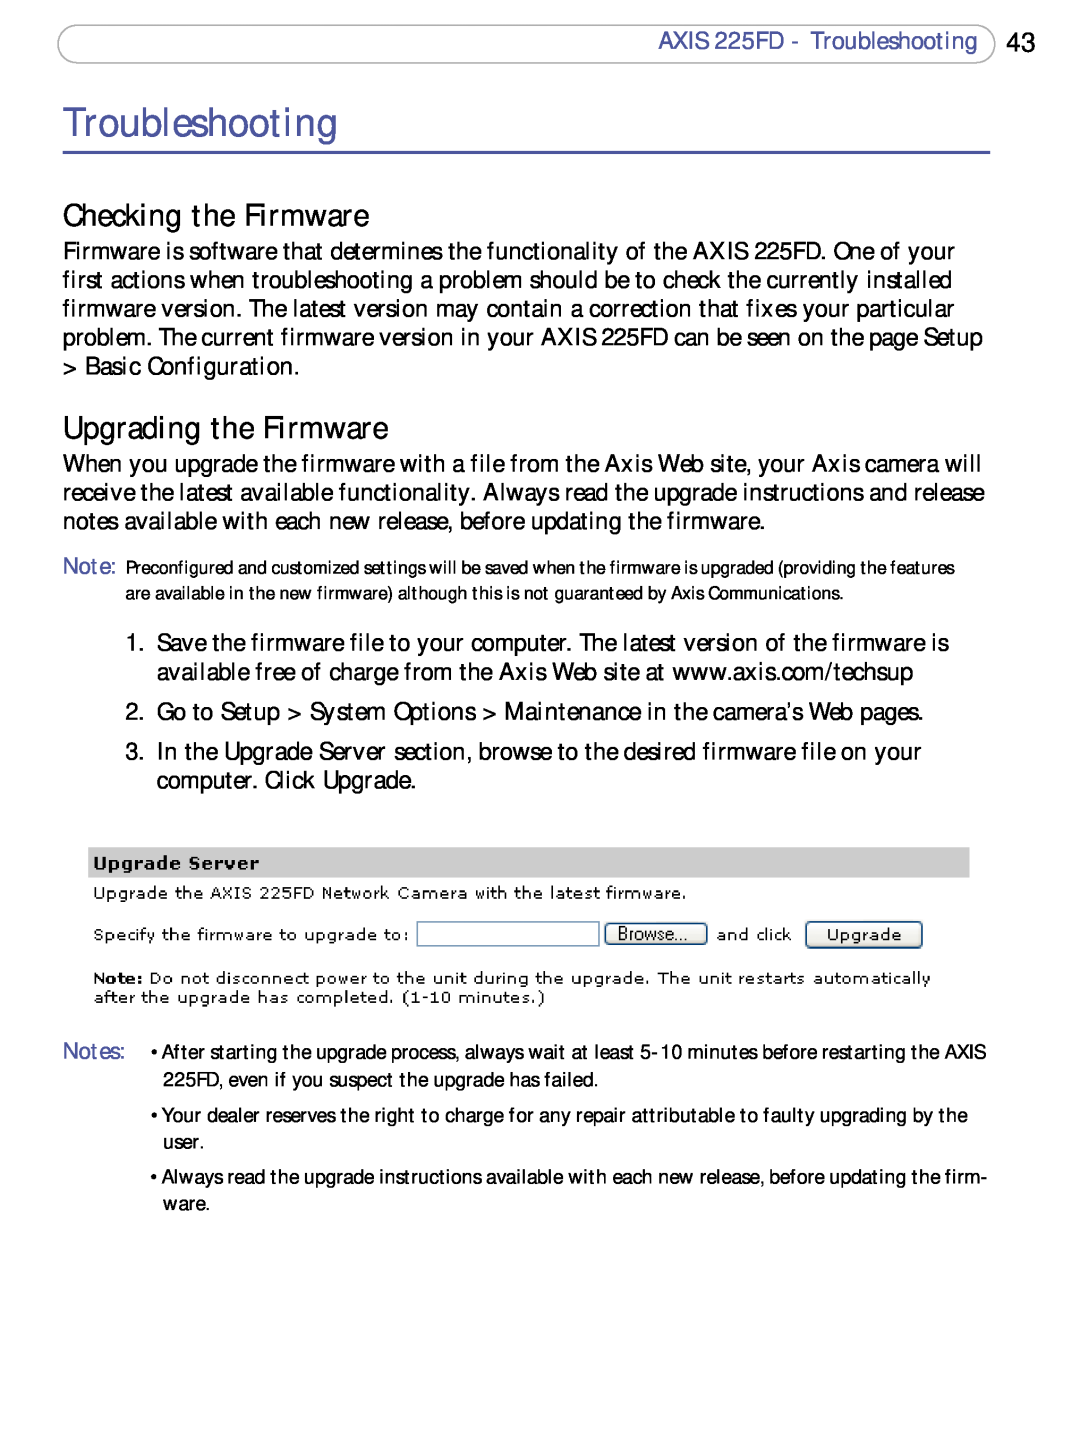 Axis Communications user manual Checking the Firmware, Upgrading the Firmware, AXIS 225FD - Troubleshooting 